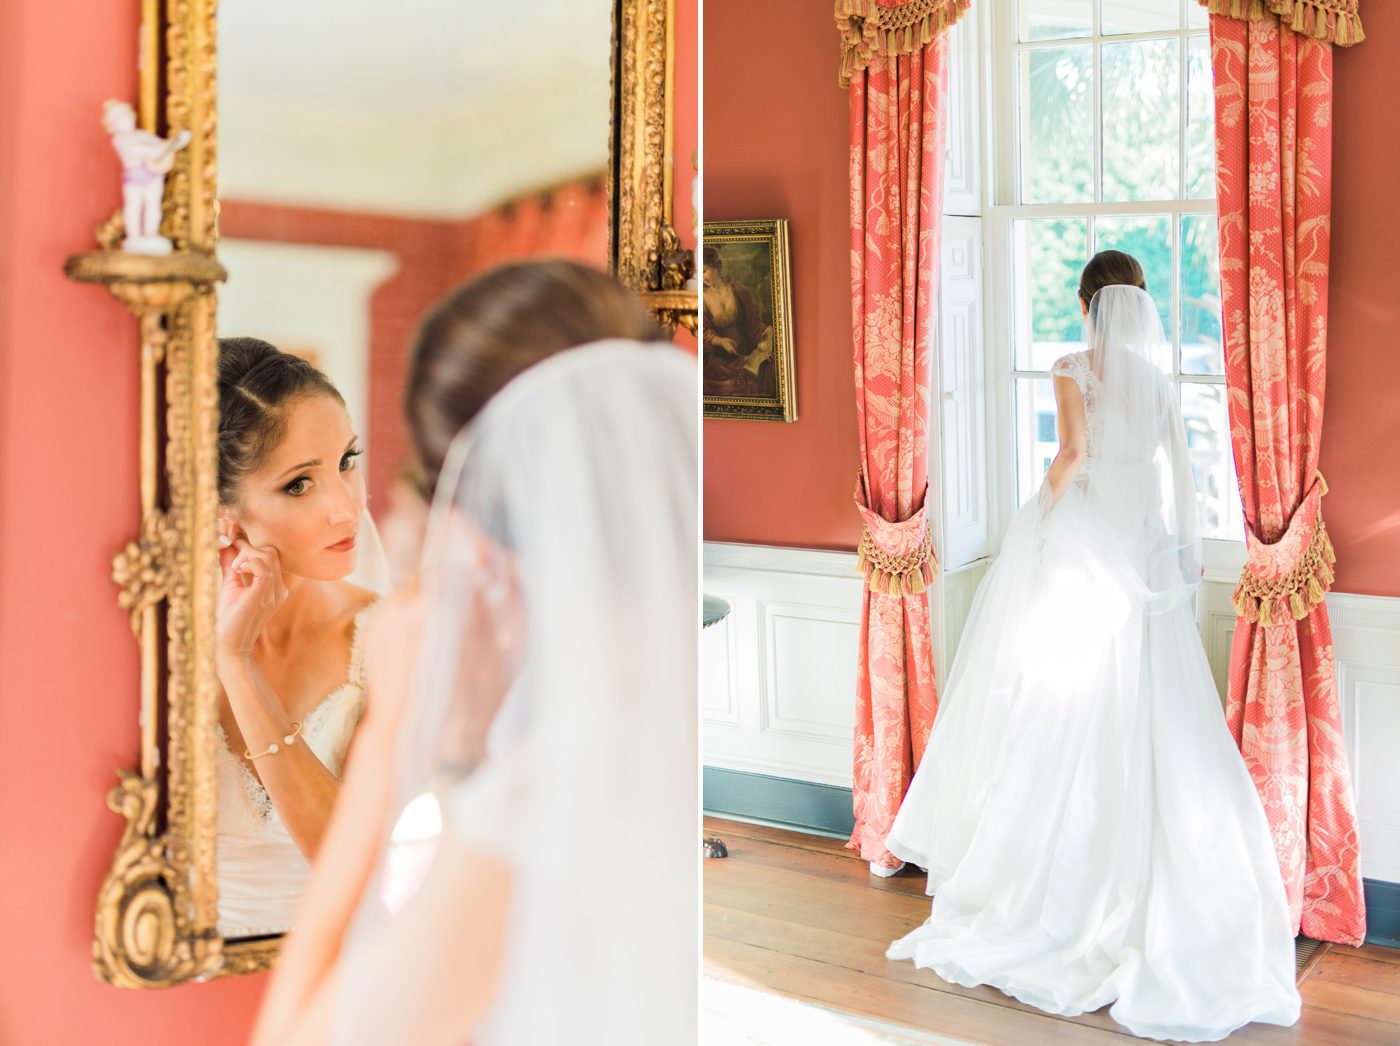 Bride getting ready at William Aiken House | Elegant William Aiken House Wedding Photos | Charleston SC wedding photographers Catherine Ann Photography